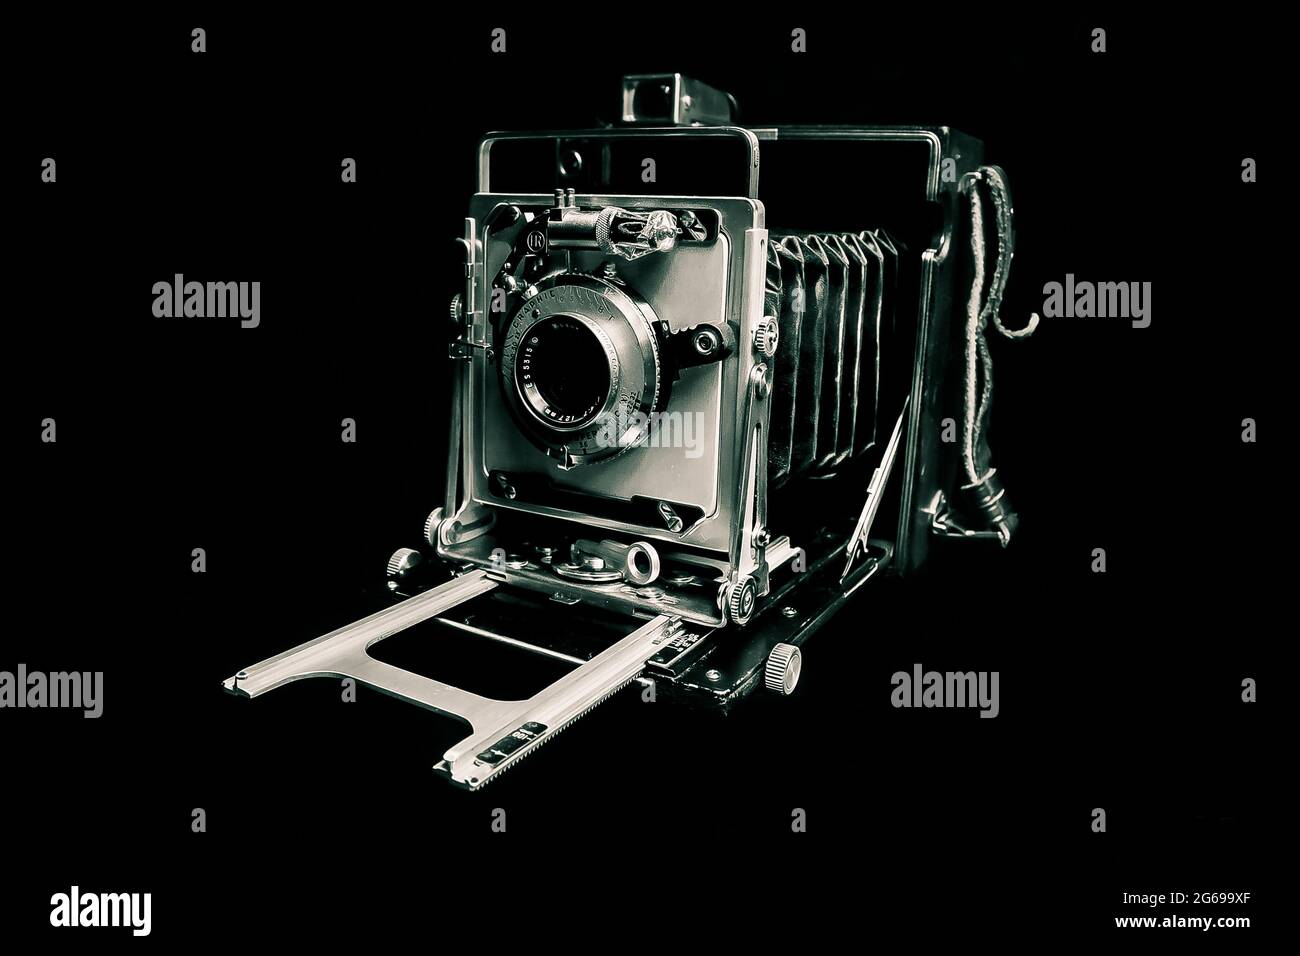 This is an image of my old Crown Graphic 4X5 press camera.  My research on the serial number puts it at around a 1950 vintage.  She’s fully functional Stock Photo